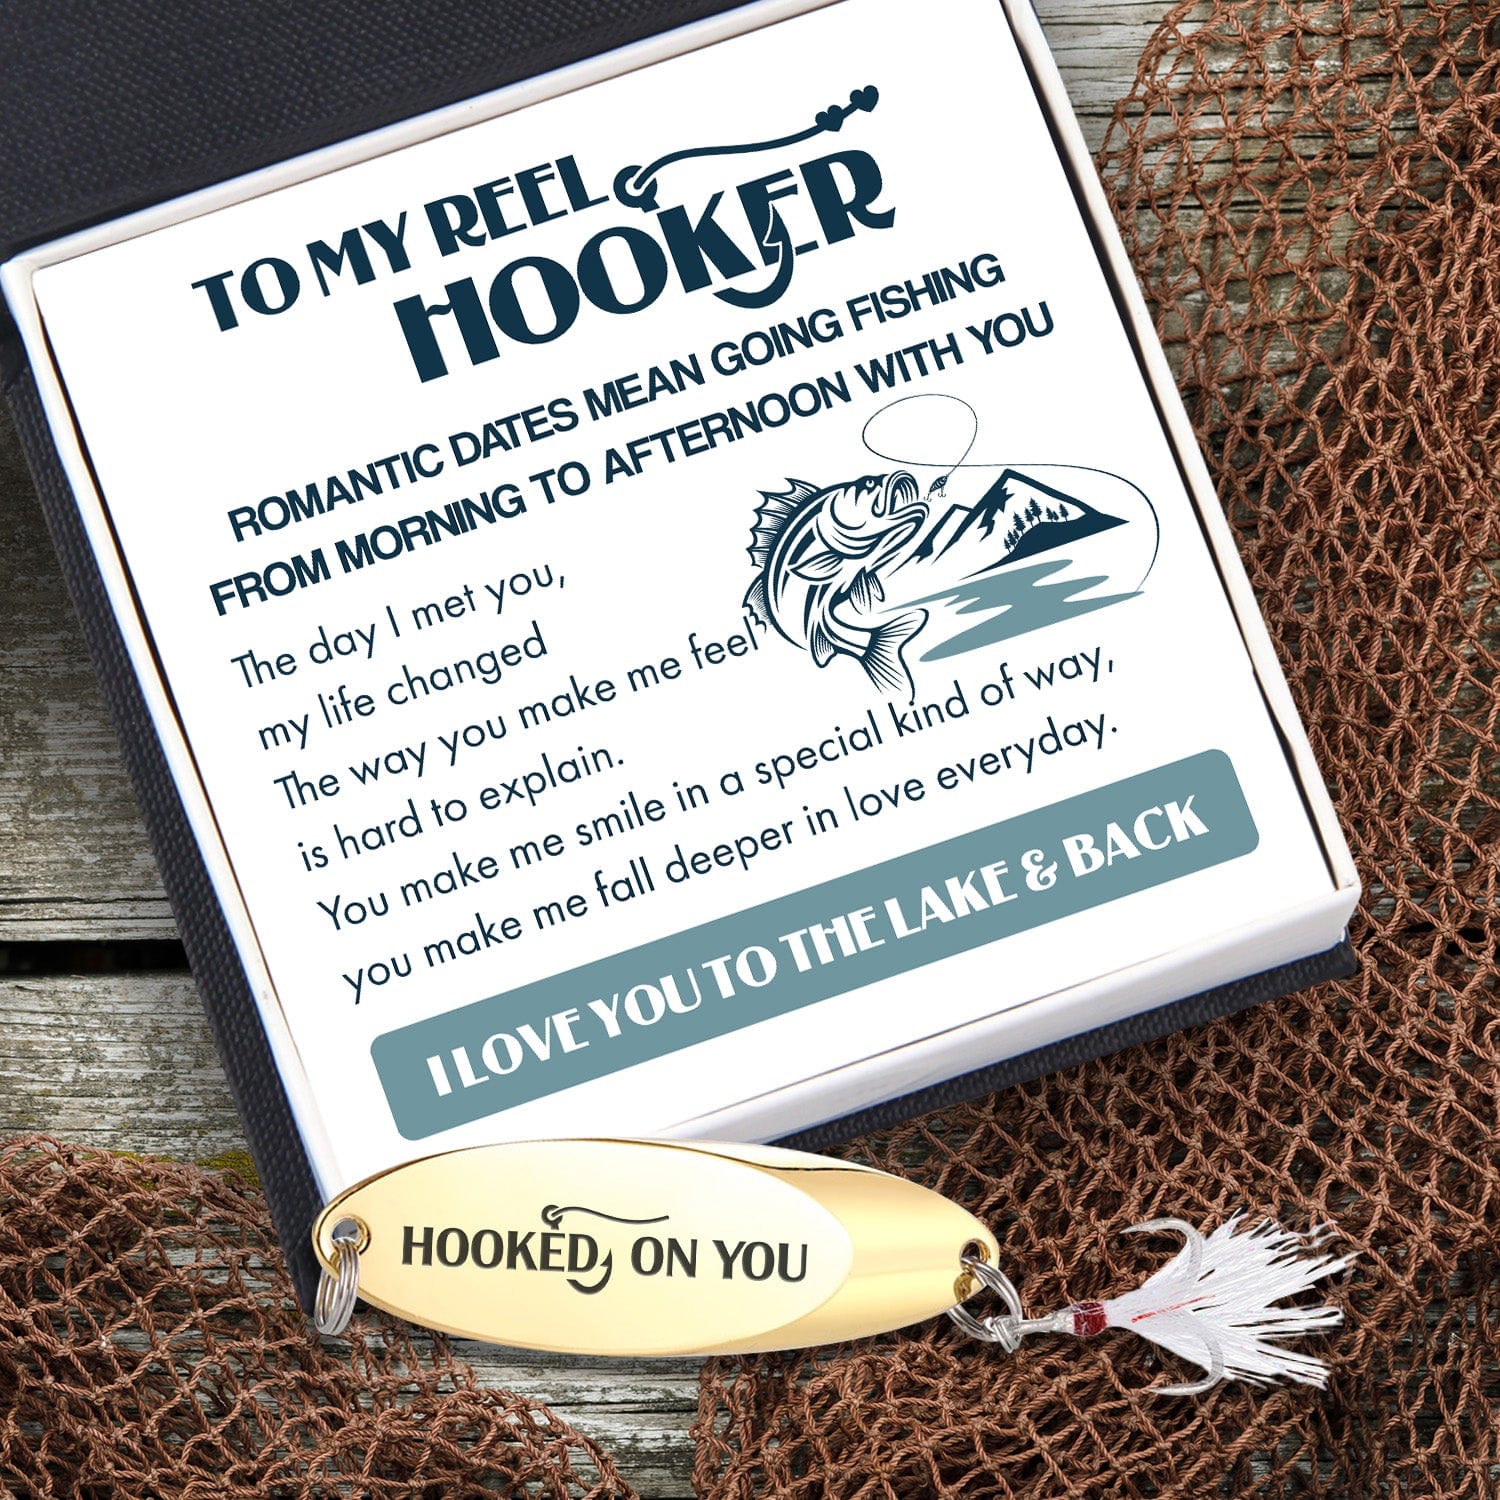 Sequin Fishing Bait - Fishing - To My Reel Hooker - The Day I Met You, -  Wrapsify